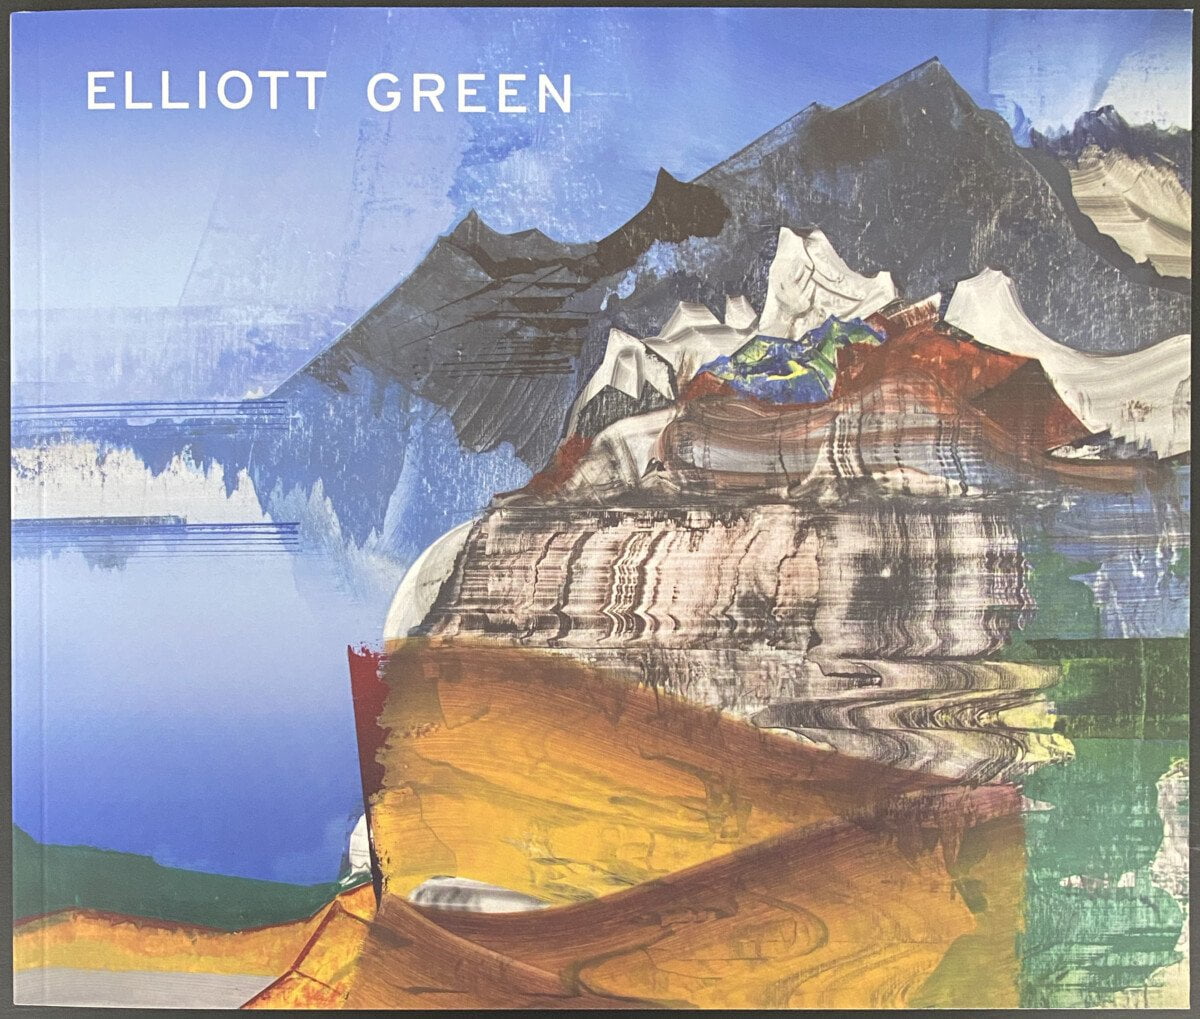 This is the cover of the Elliott Green exhibition called "Human Nature" at Pierogi gallery in 2017